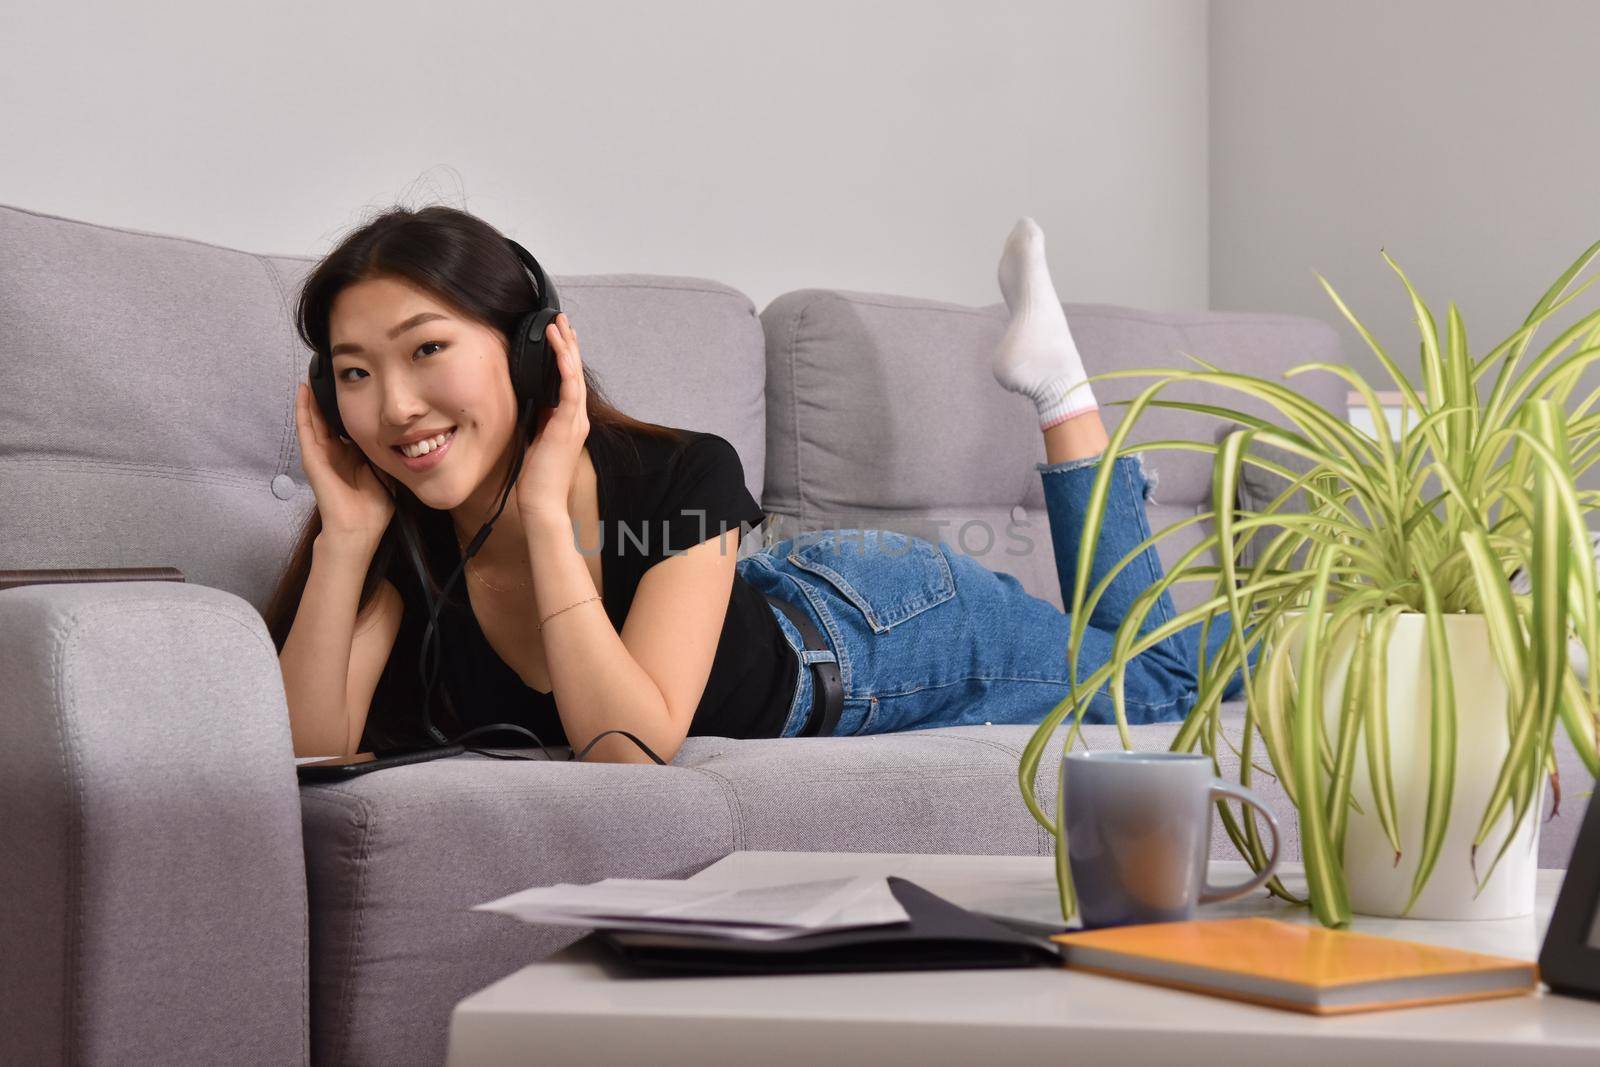 Excited beautiful asian teen listening music in headphones on her sofa at home. Wearing jeans and black tshirt